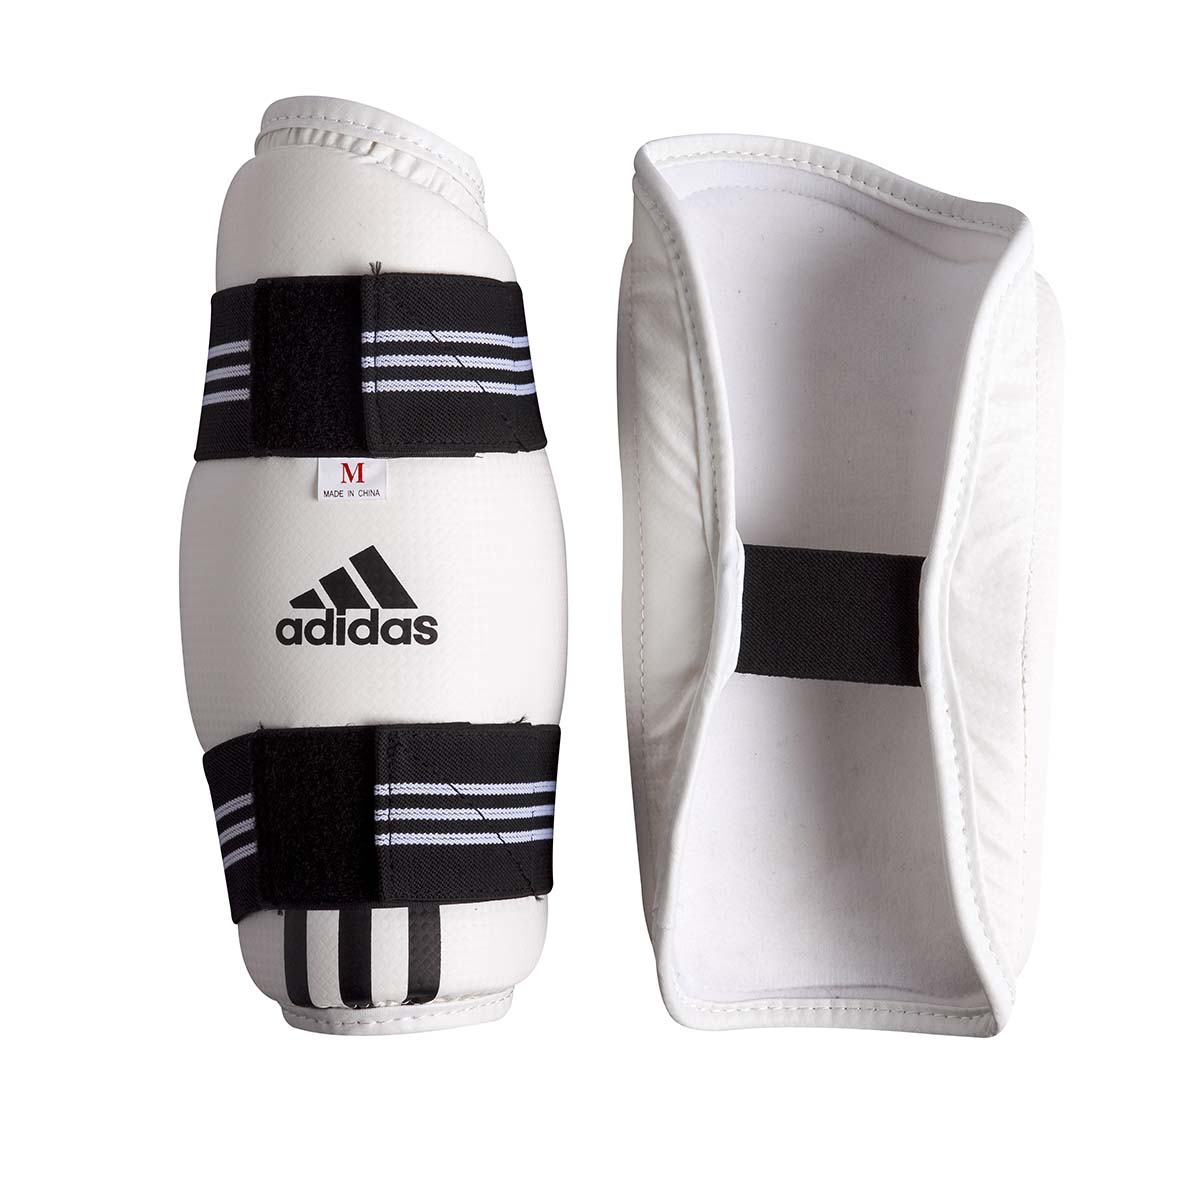 Adidas Forearm Guard PU WT Approved -0